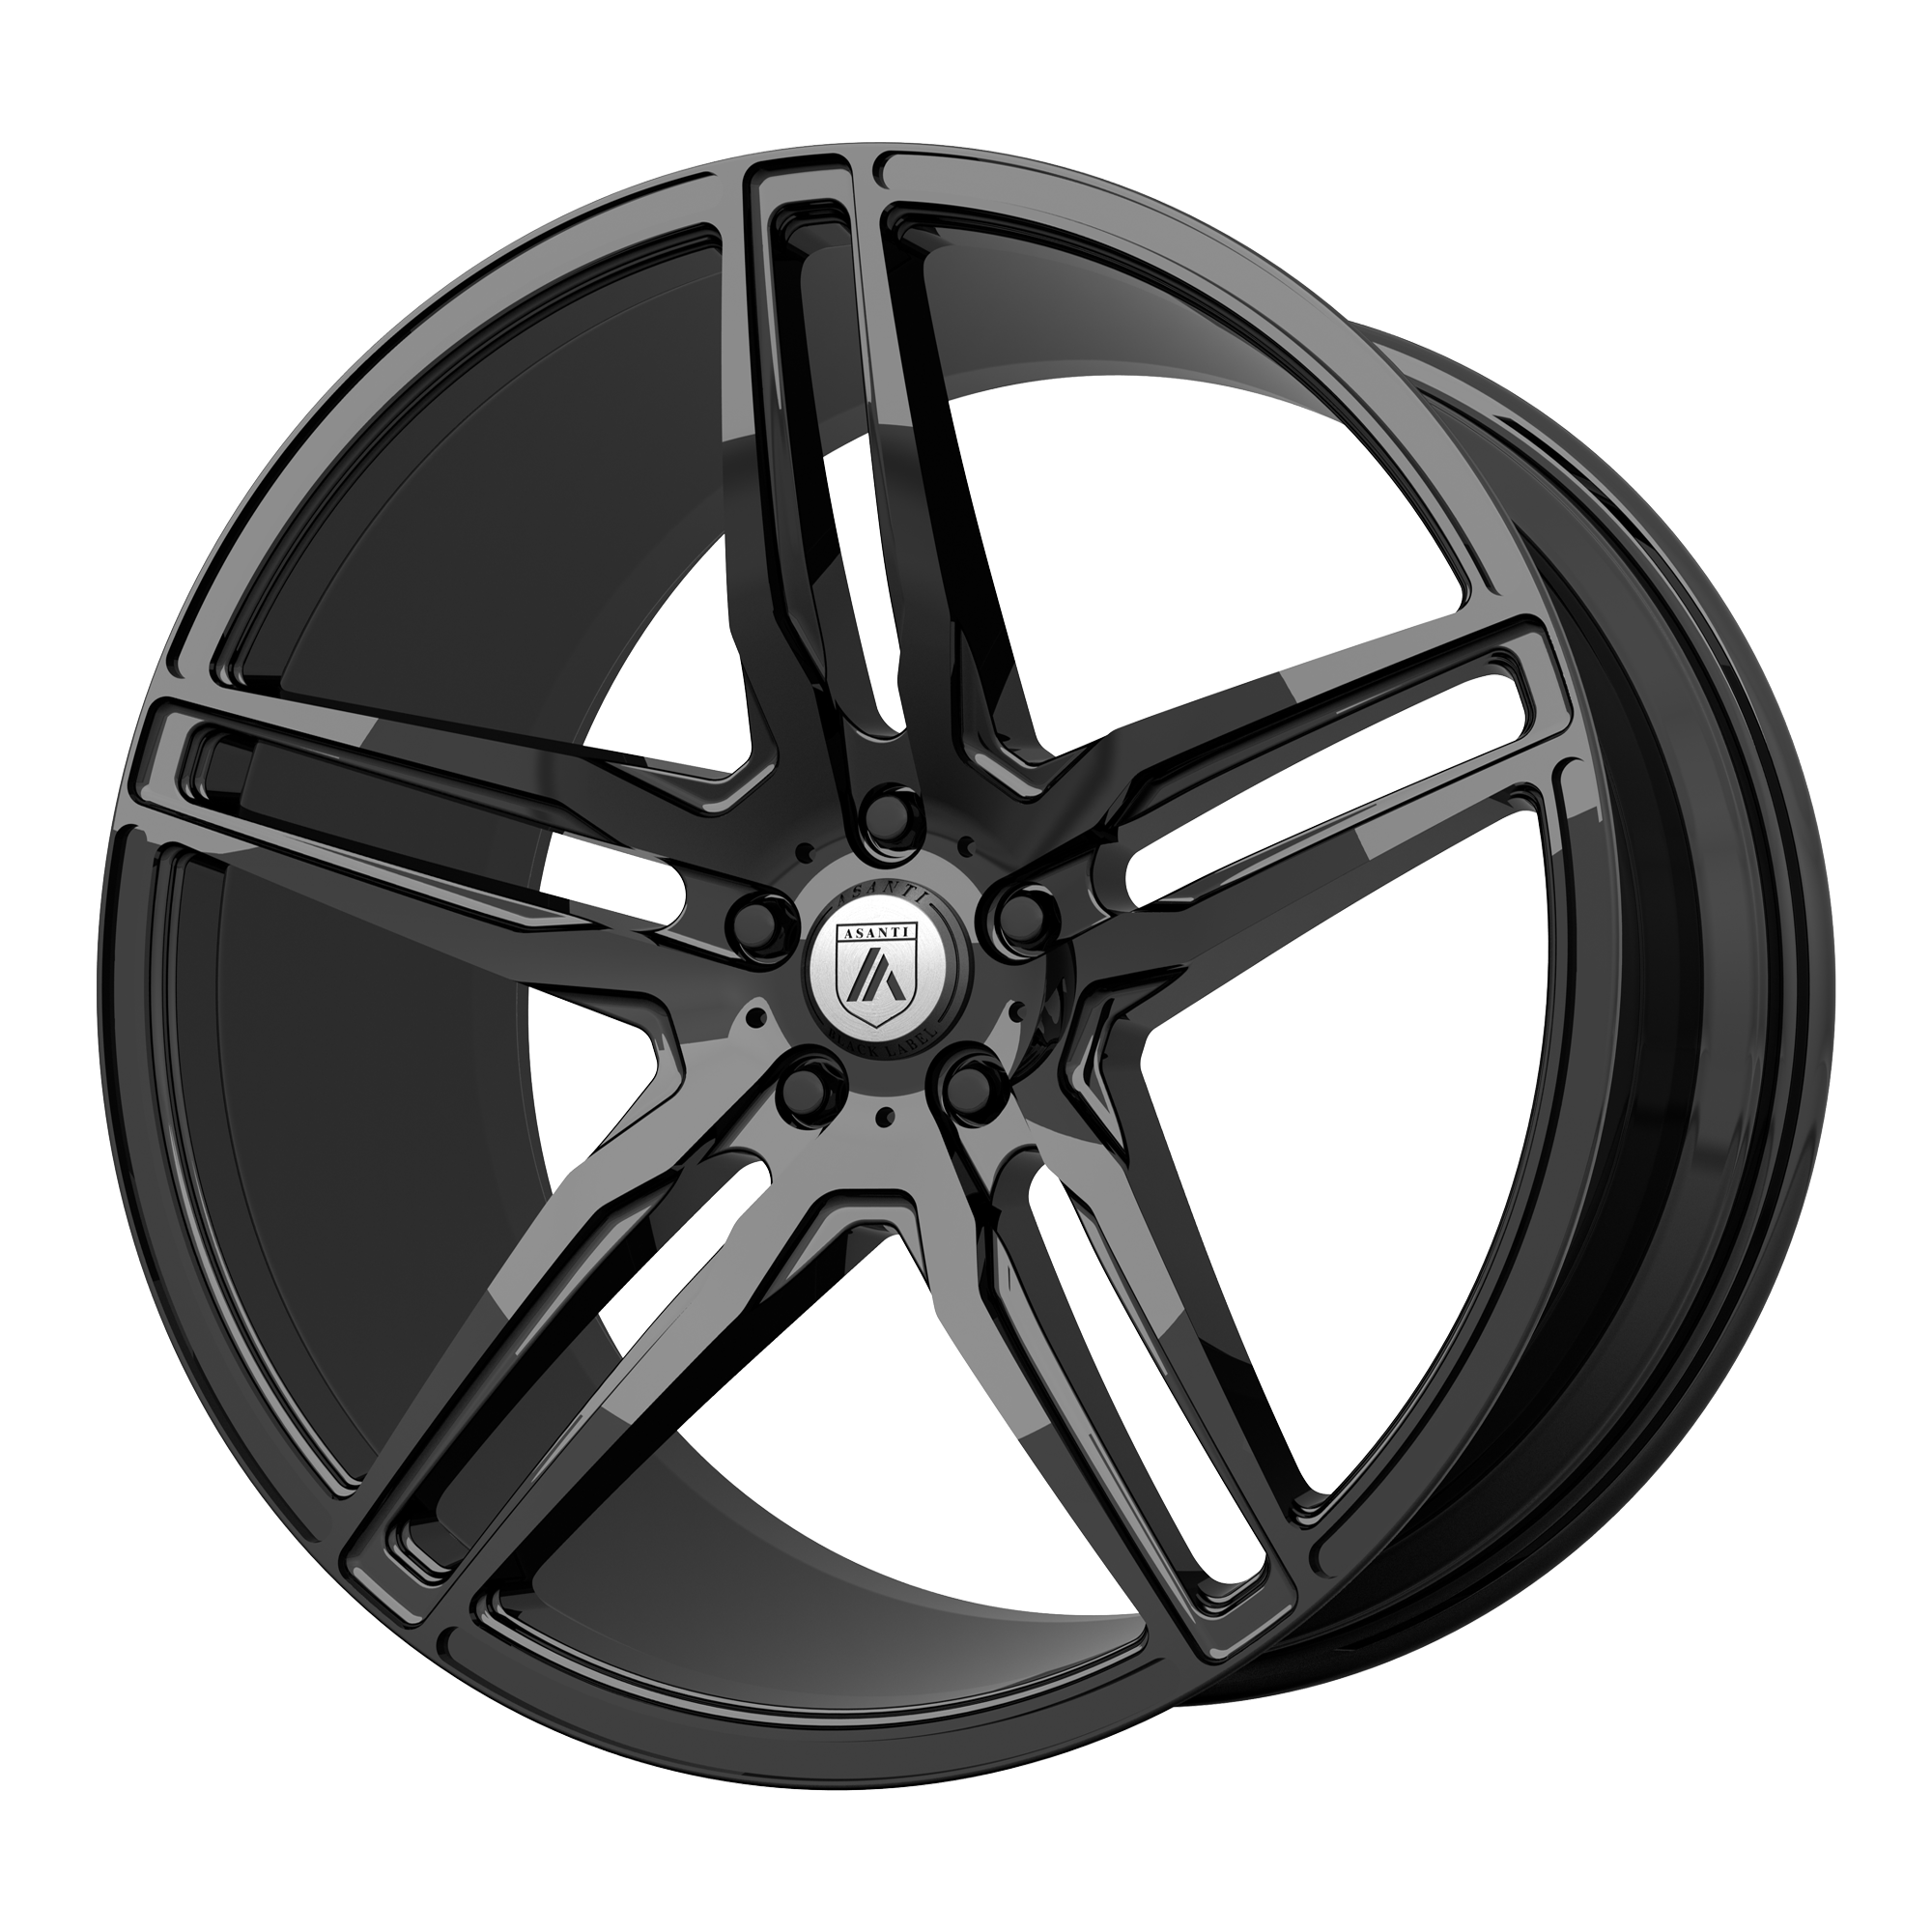 ORION 20x10.5 Blank GLOSS BLACK (20.00 - 37.00 mm) - Tires and Engine Performance